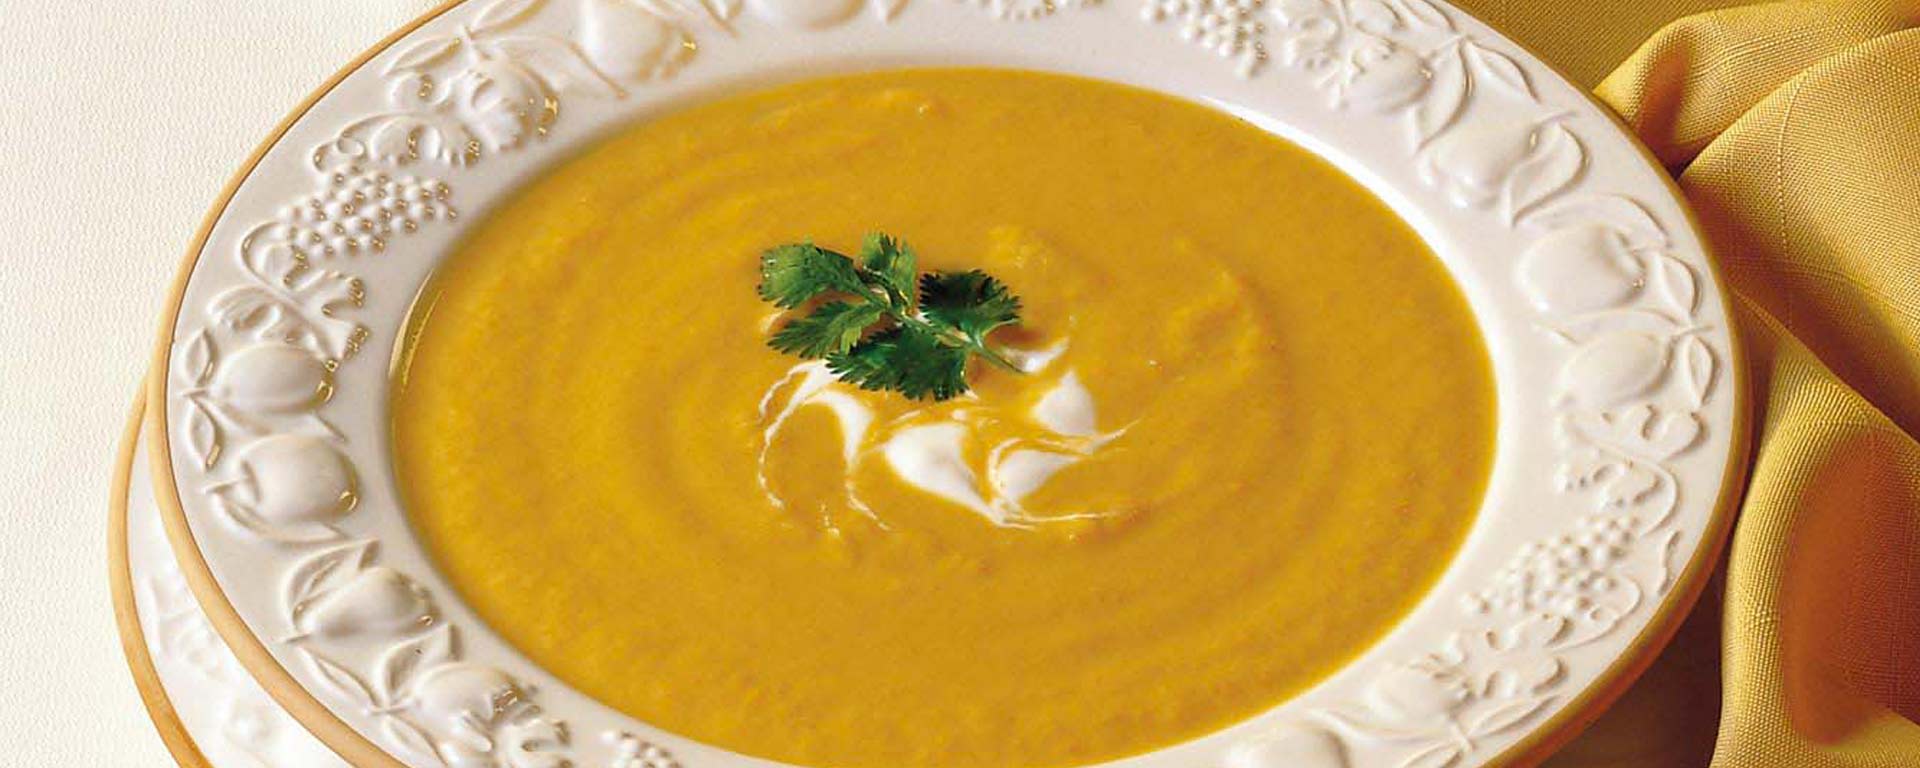 Photo of - Carrot and Coriander Soup